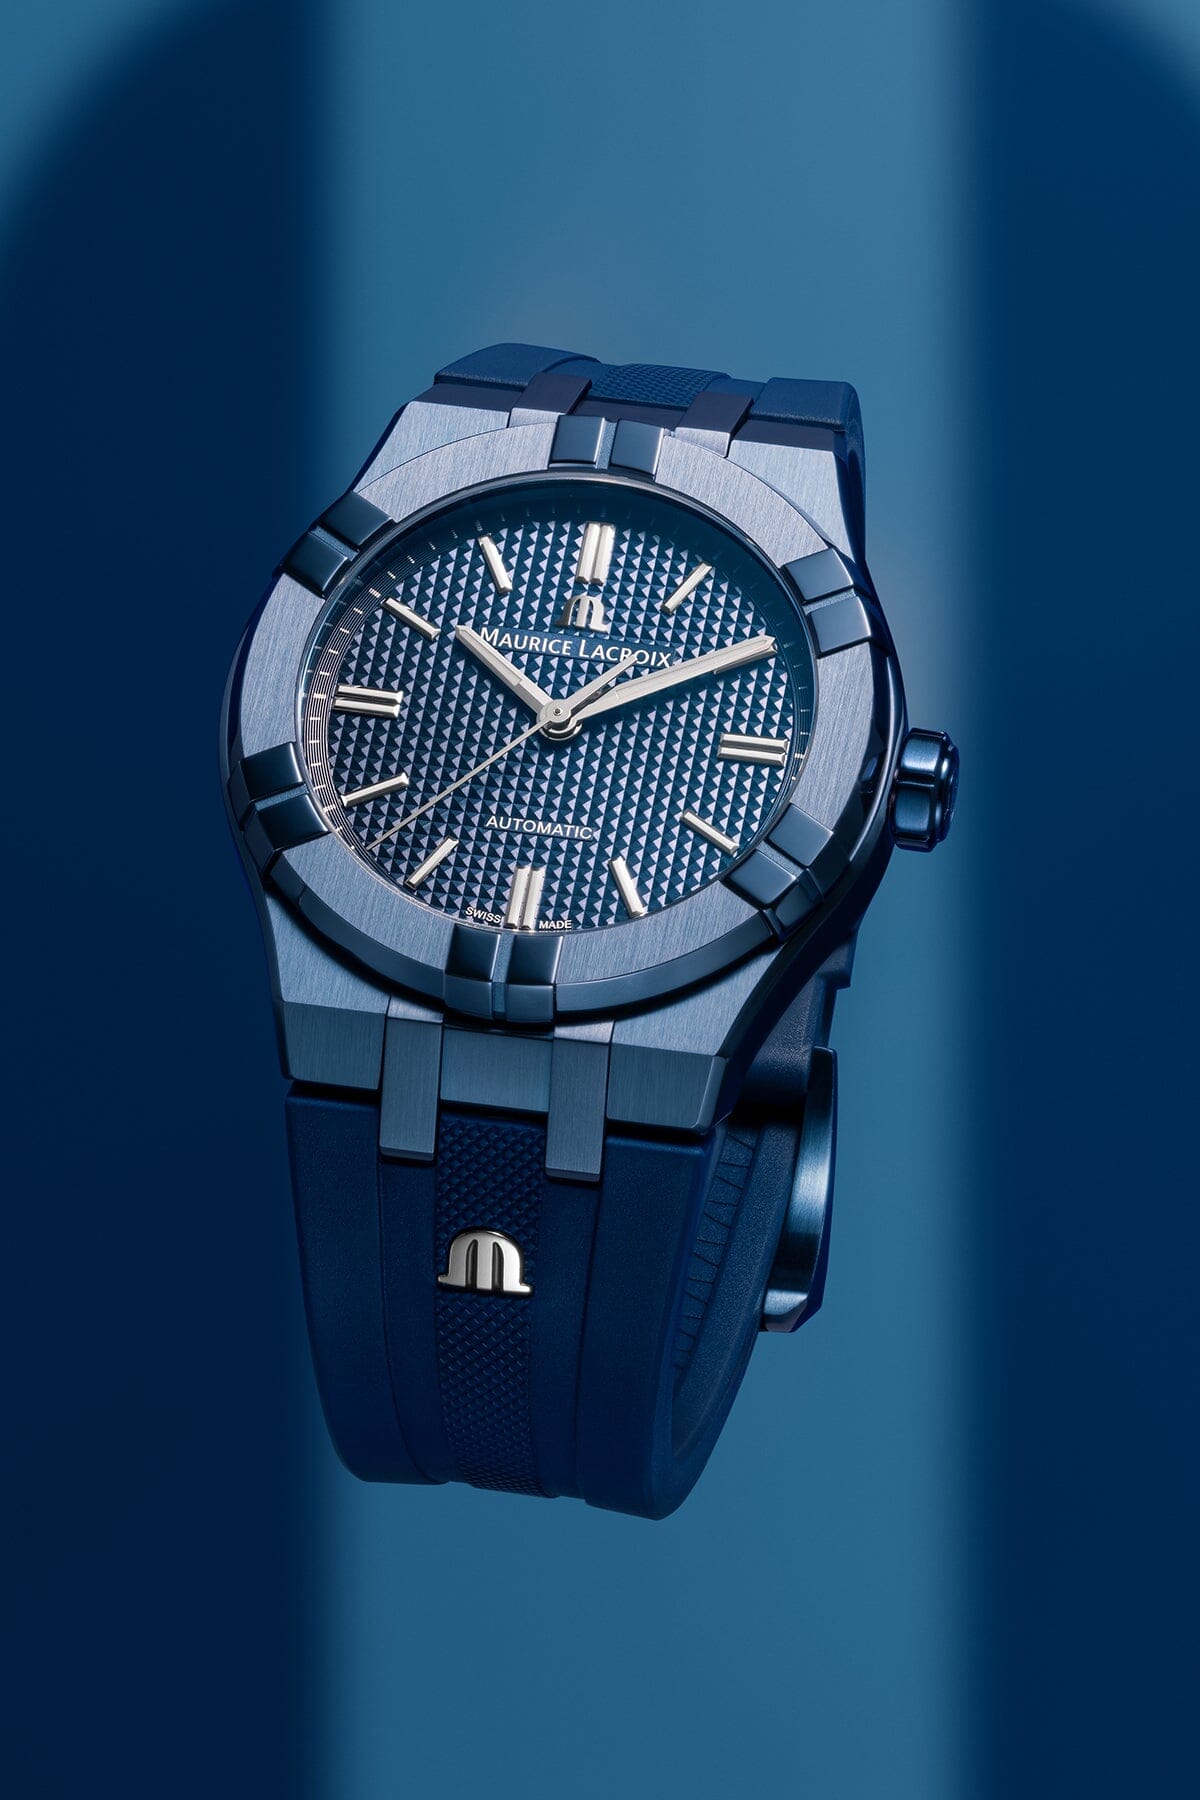 AIKON AUTOMATIC 39mm BLUE PVD LIMITED EDITION Maurice Lacroix